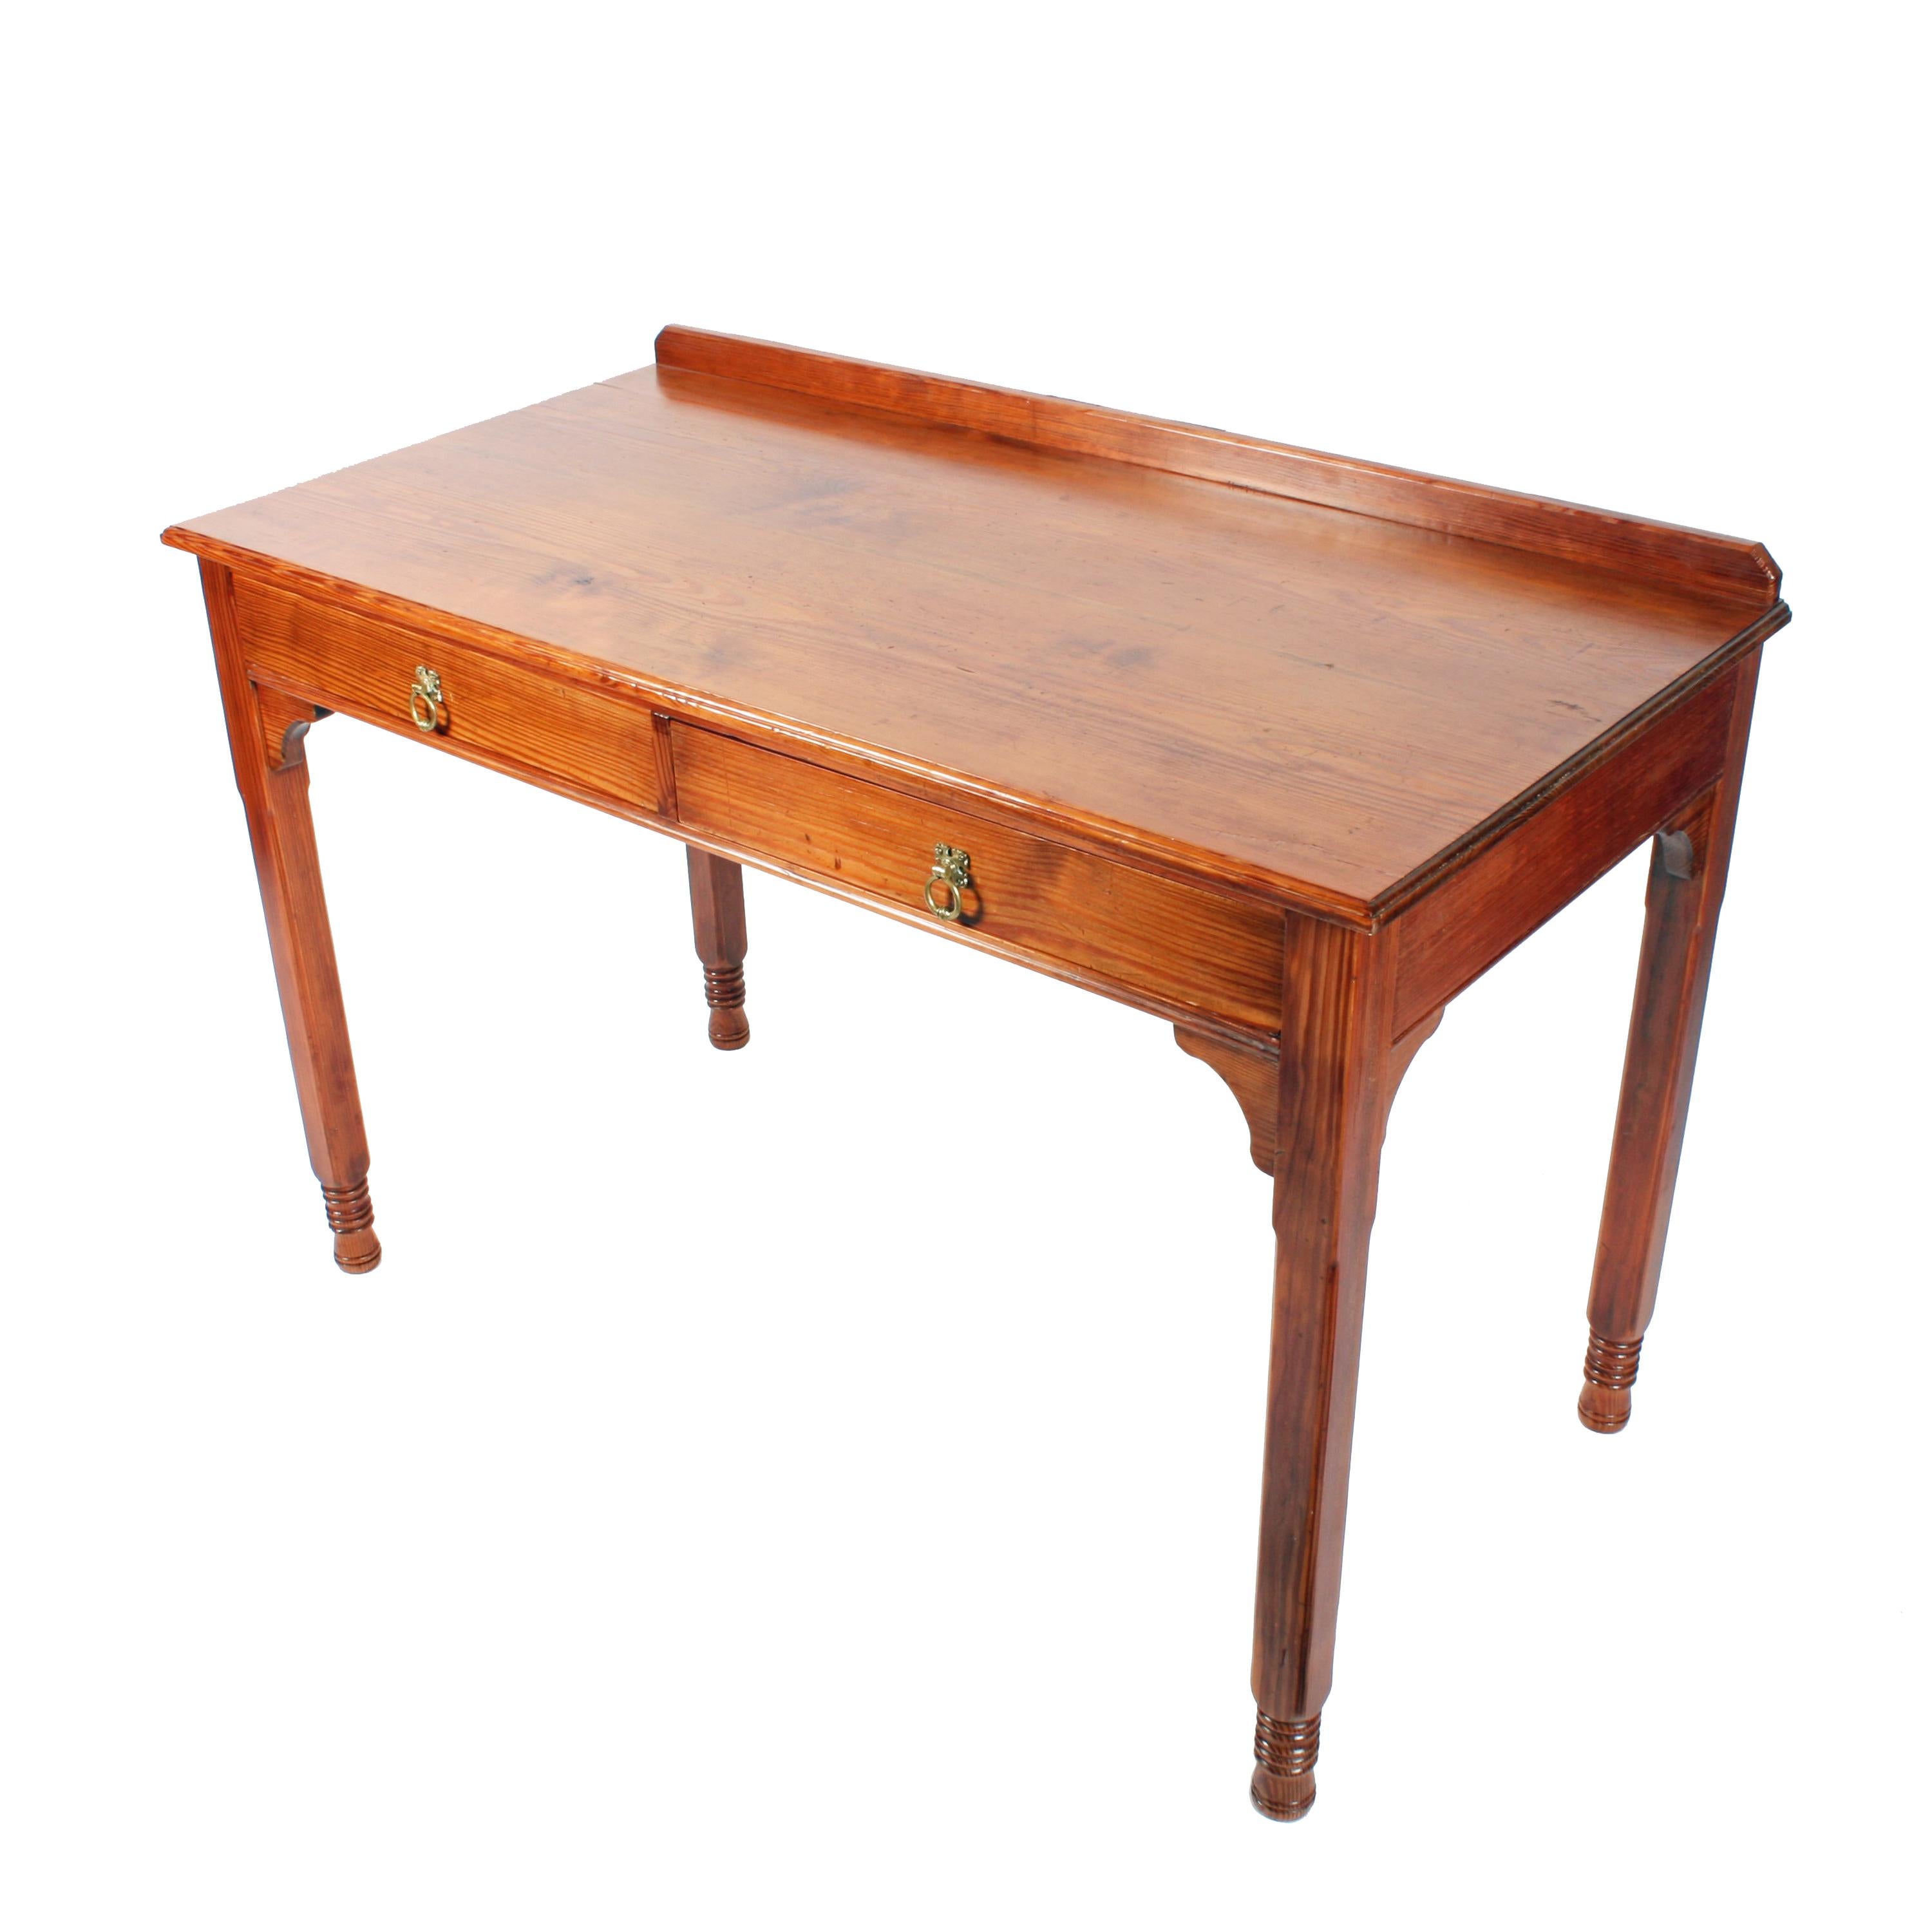 Gillows of Lancaster two-drawer pine table.


A 19th century pitch pine two drawer side table stamped Gillows of Lancaster.

The table has square legs with a chamfered edge and a low gallery back.

The two drawers are pine lined and have